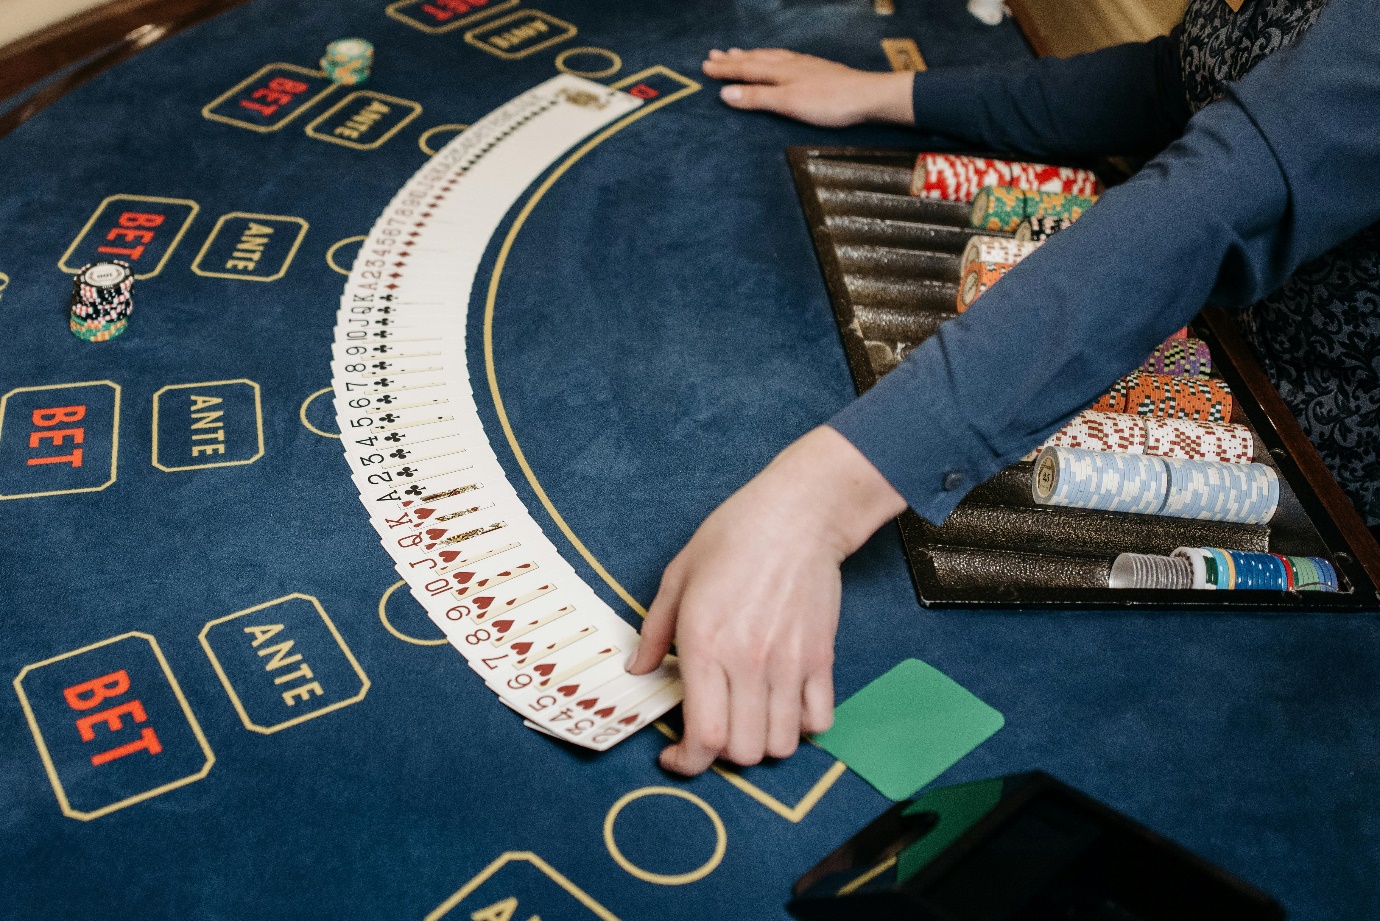 A person placing cards on a poker table

Description automatically generated